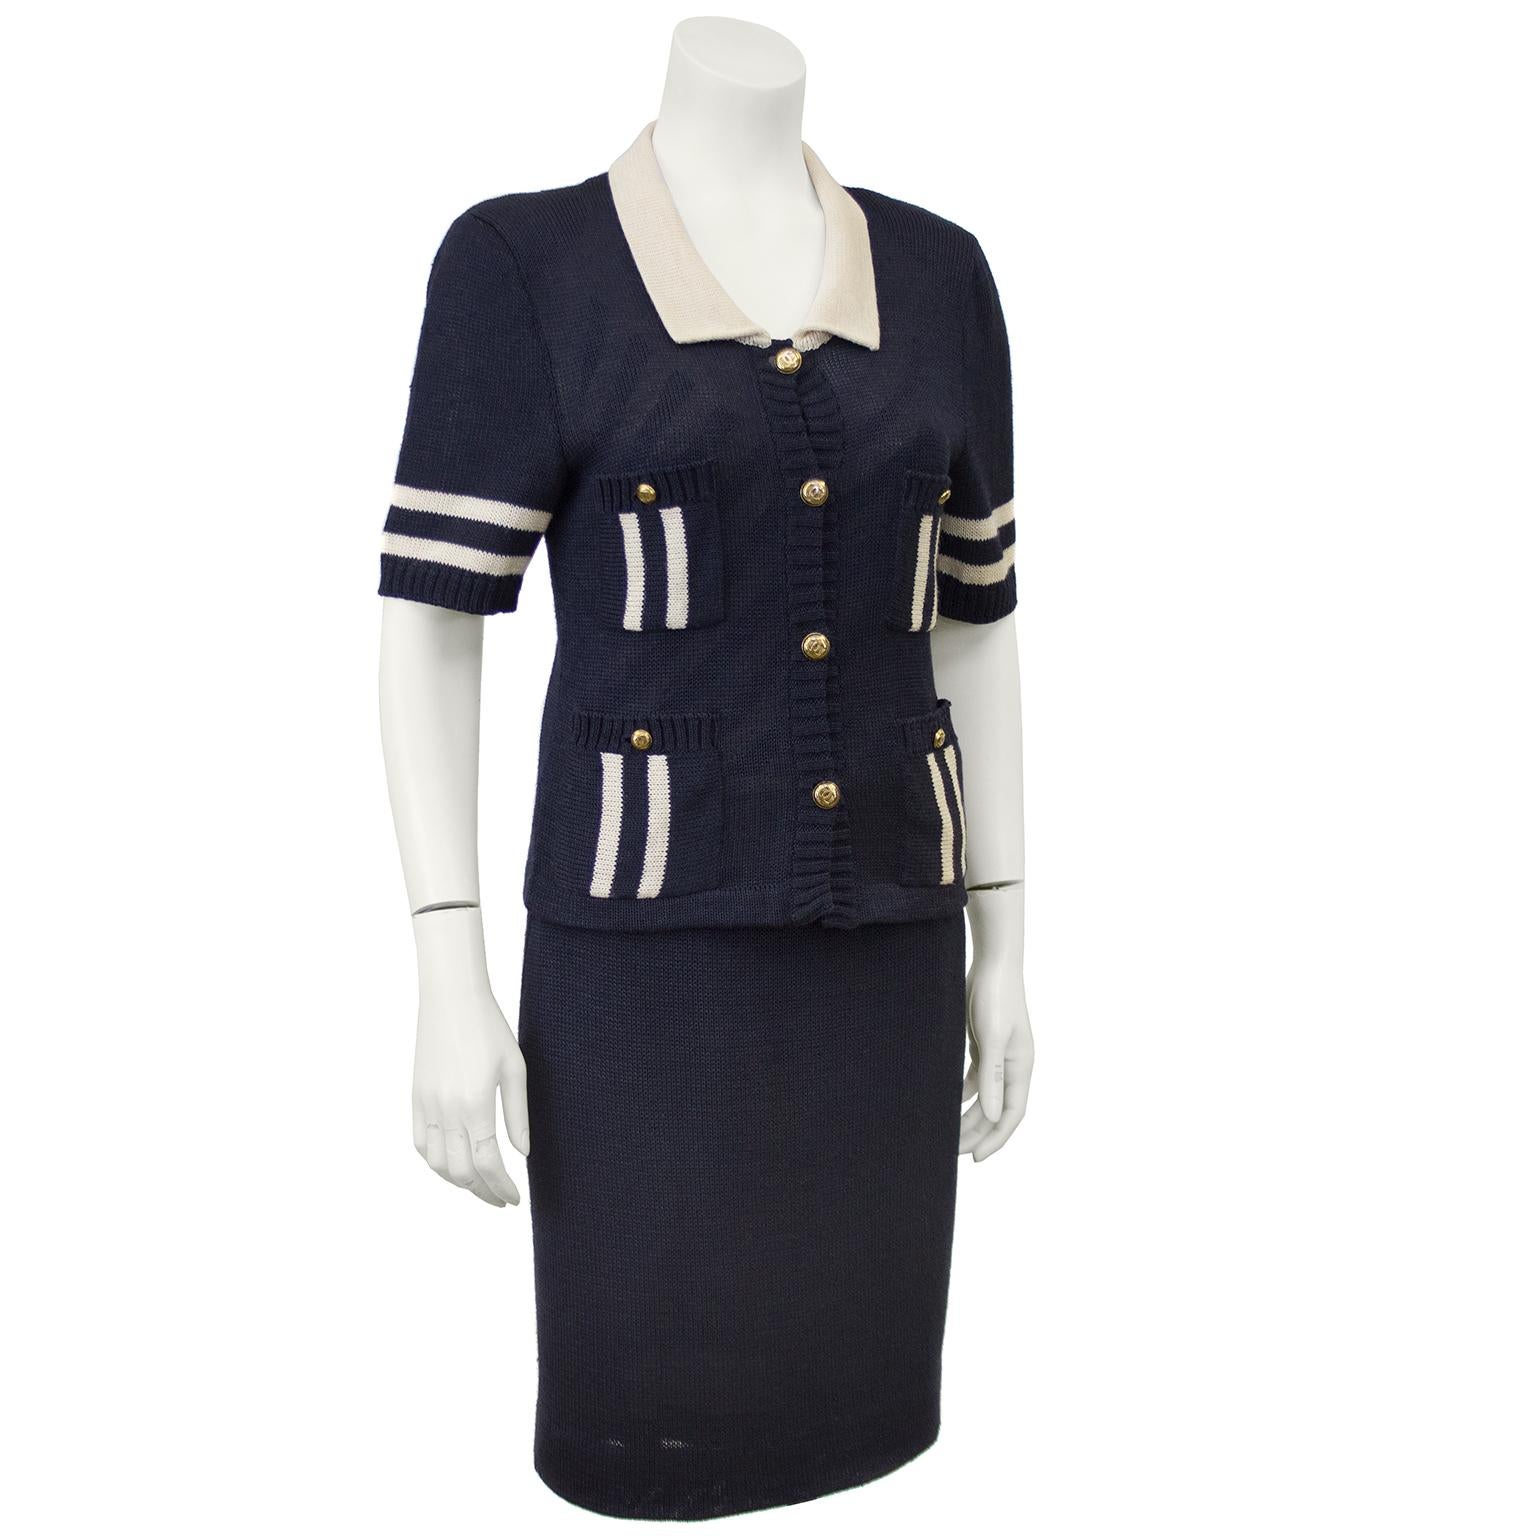 Perfect for the summer, this 1980s Chanel navy knit ensemble is amazing when worn together or 3 great pieces to add to any wardrobe. The short sleeve sweater jacket buttons up the front with goldtone CC Chanel buttons and is finished with a cream